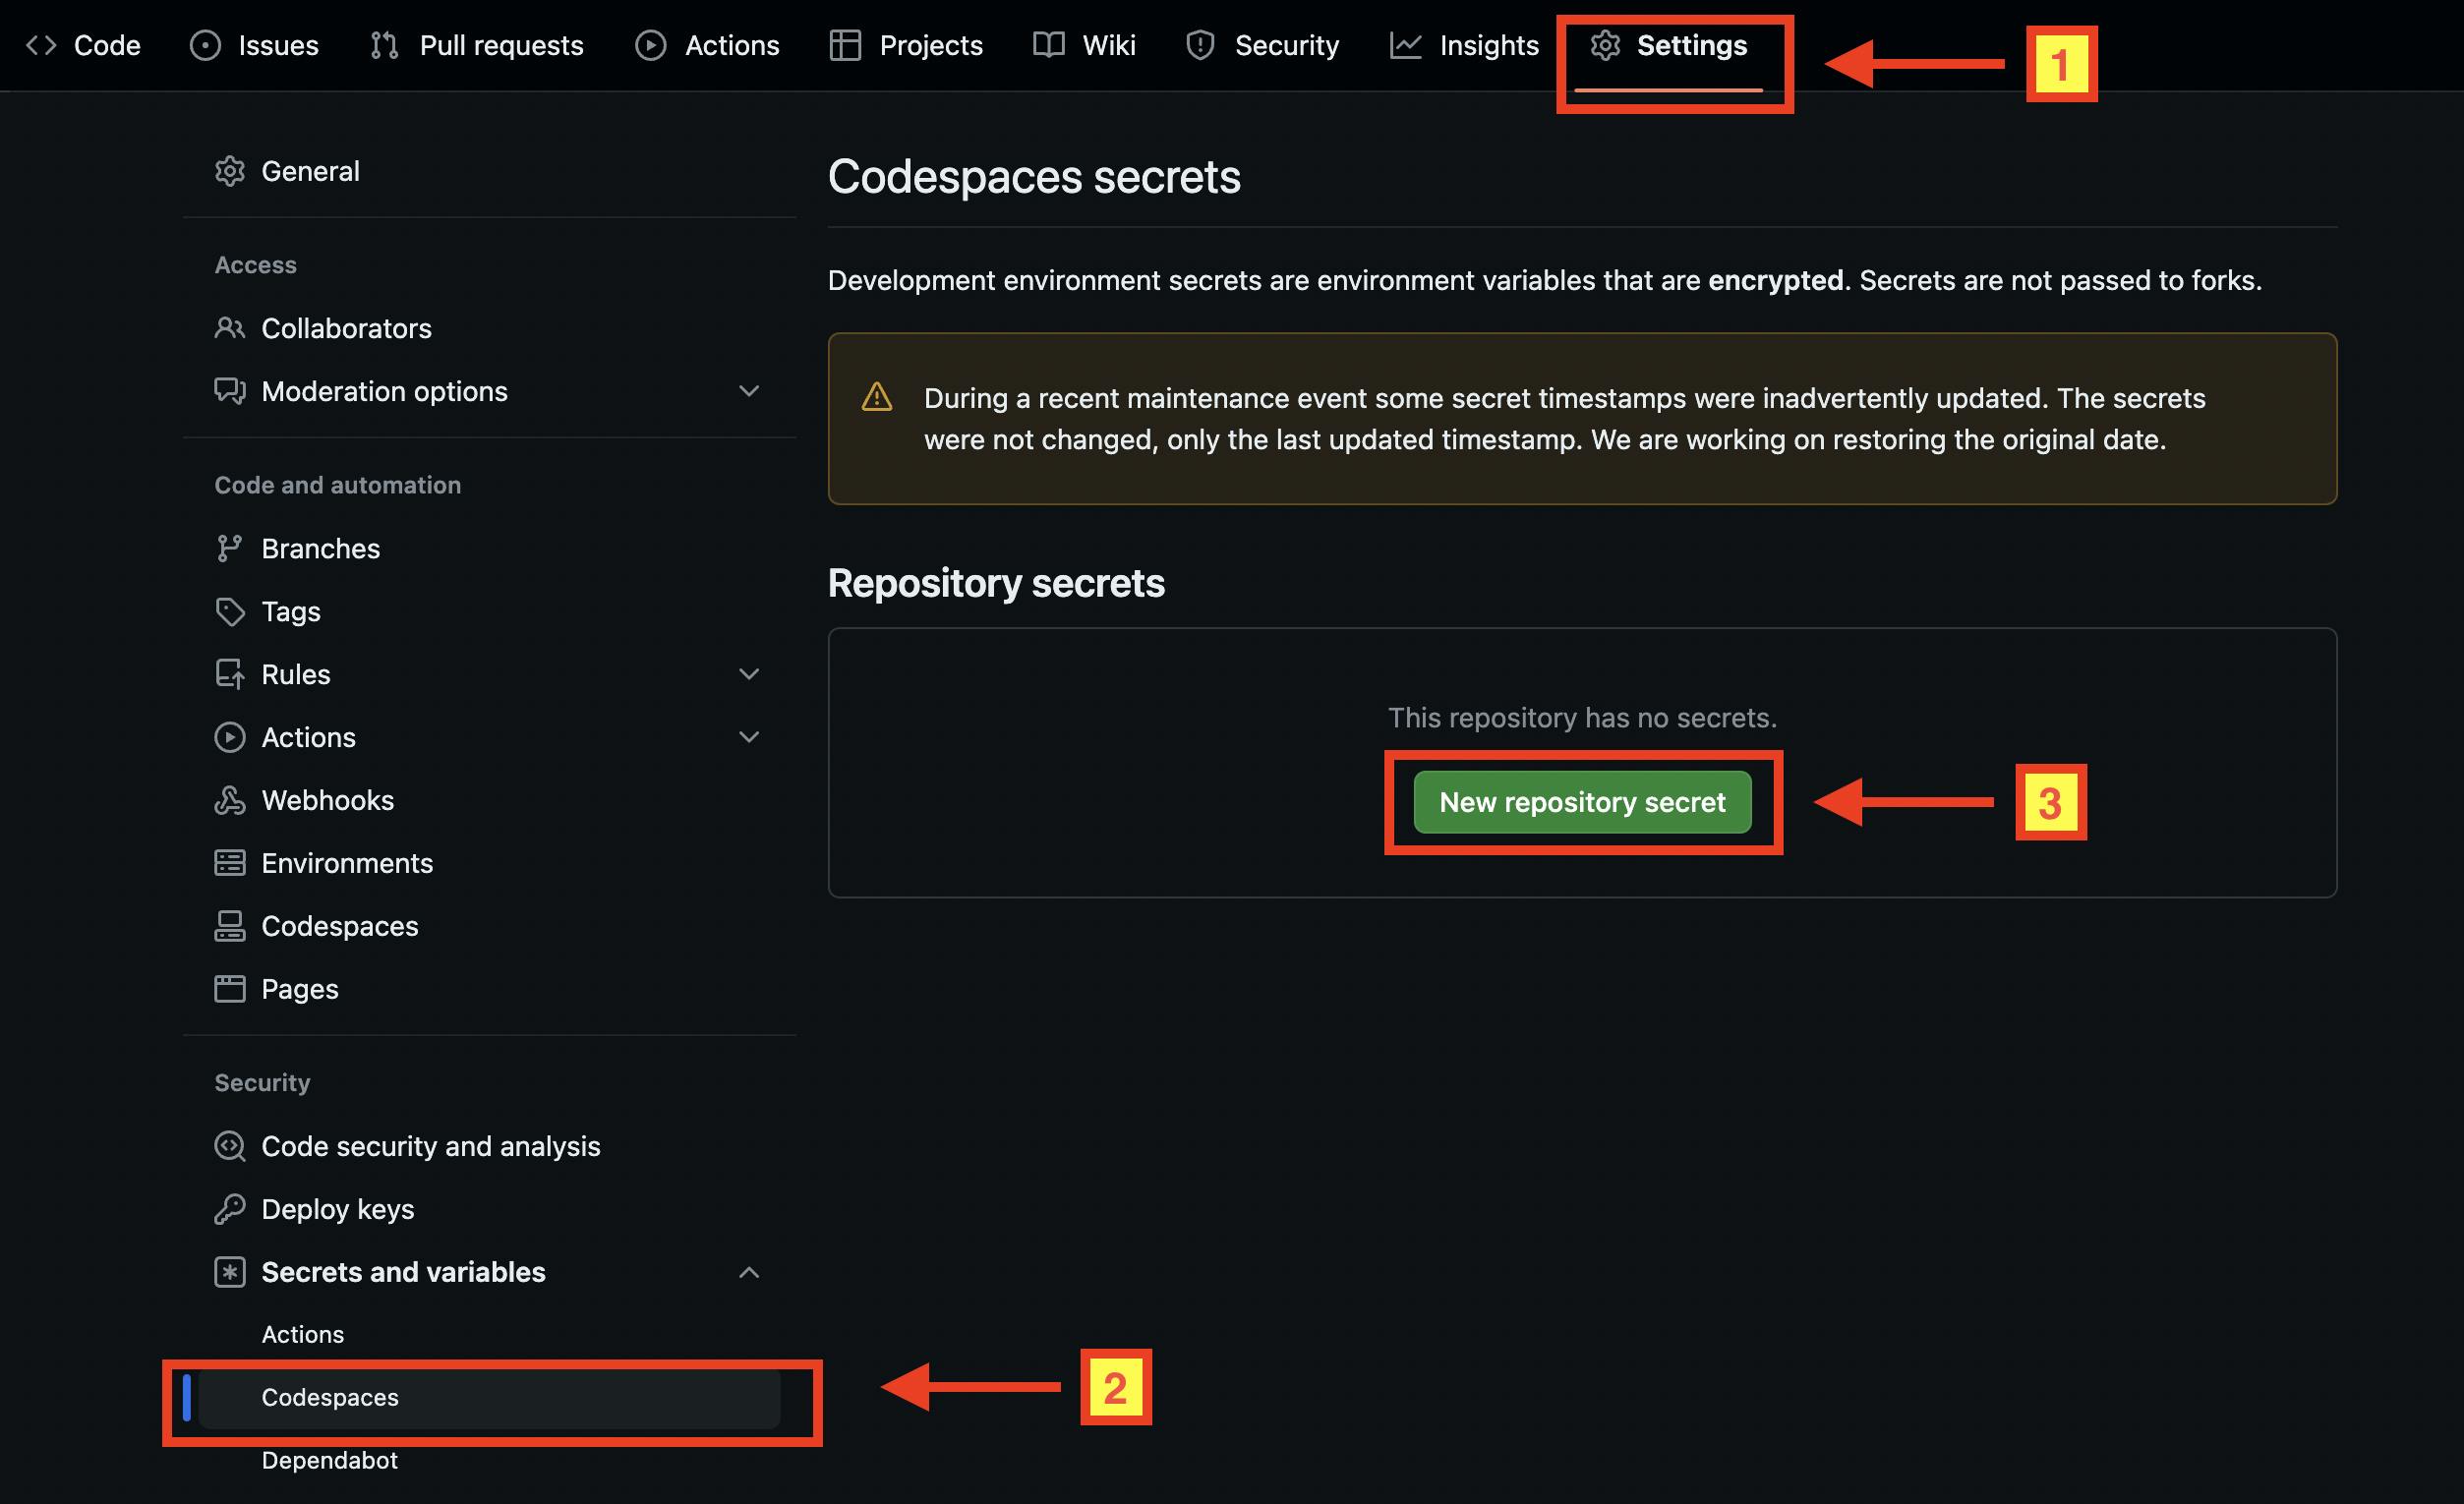 Show a GitHub web page to add repository secrets.